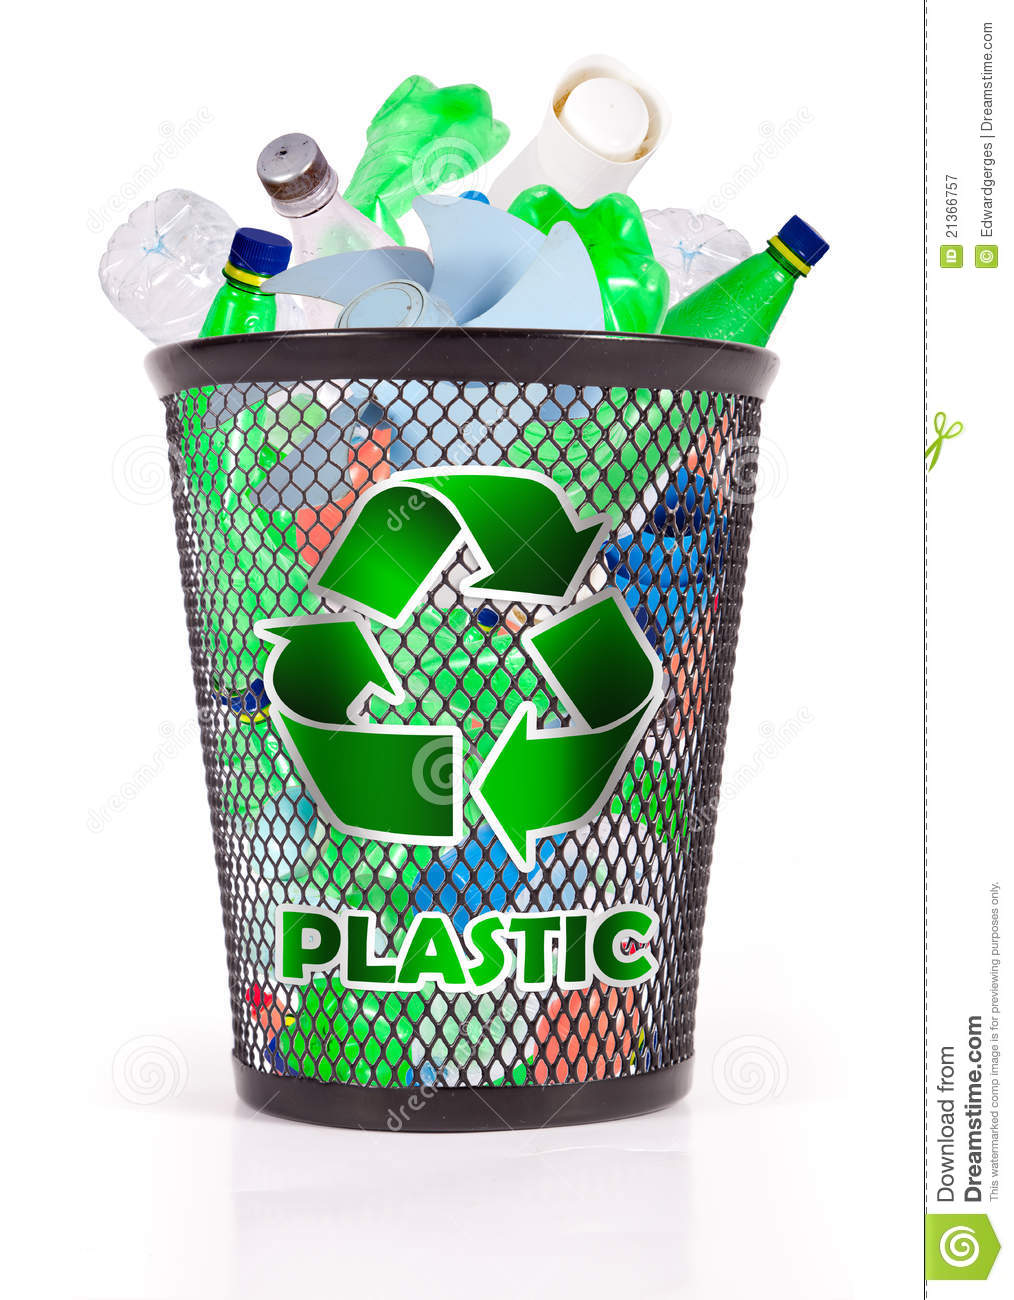 Clipart Recycle Bin Credited